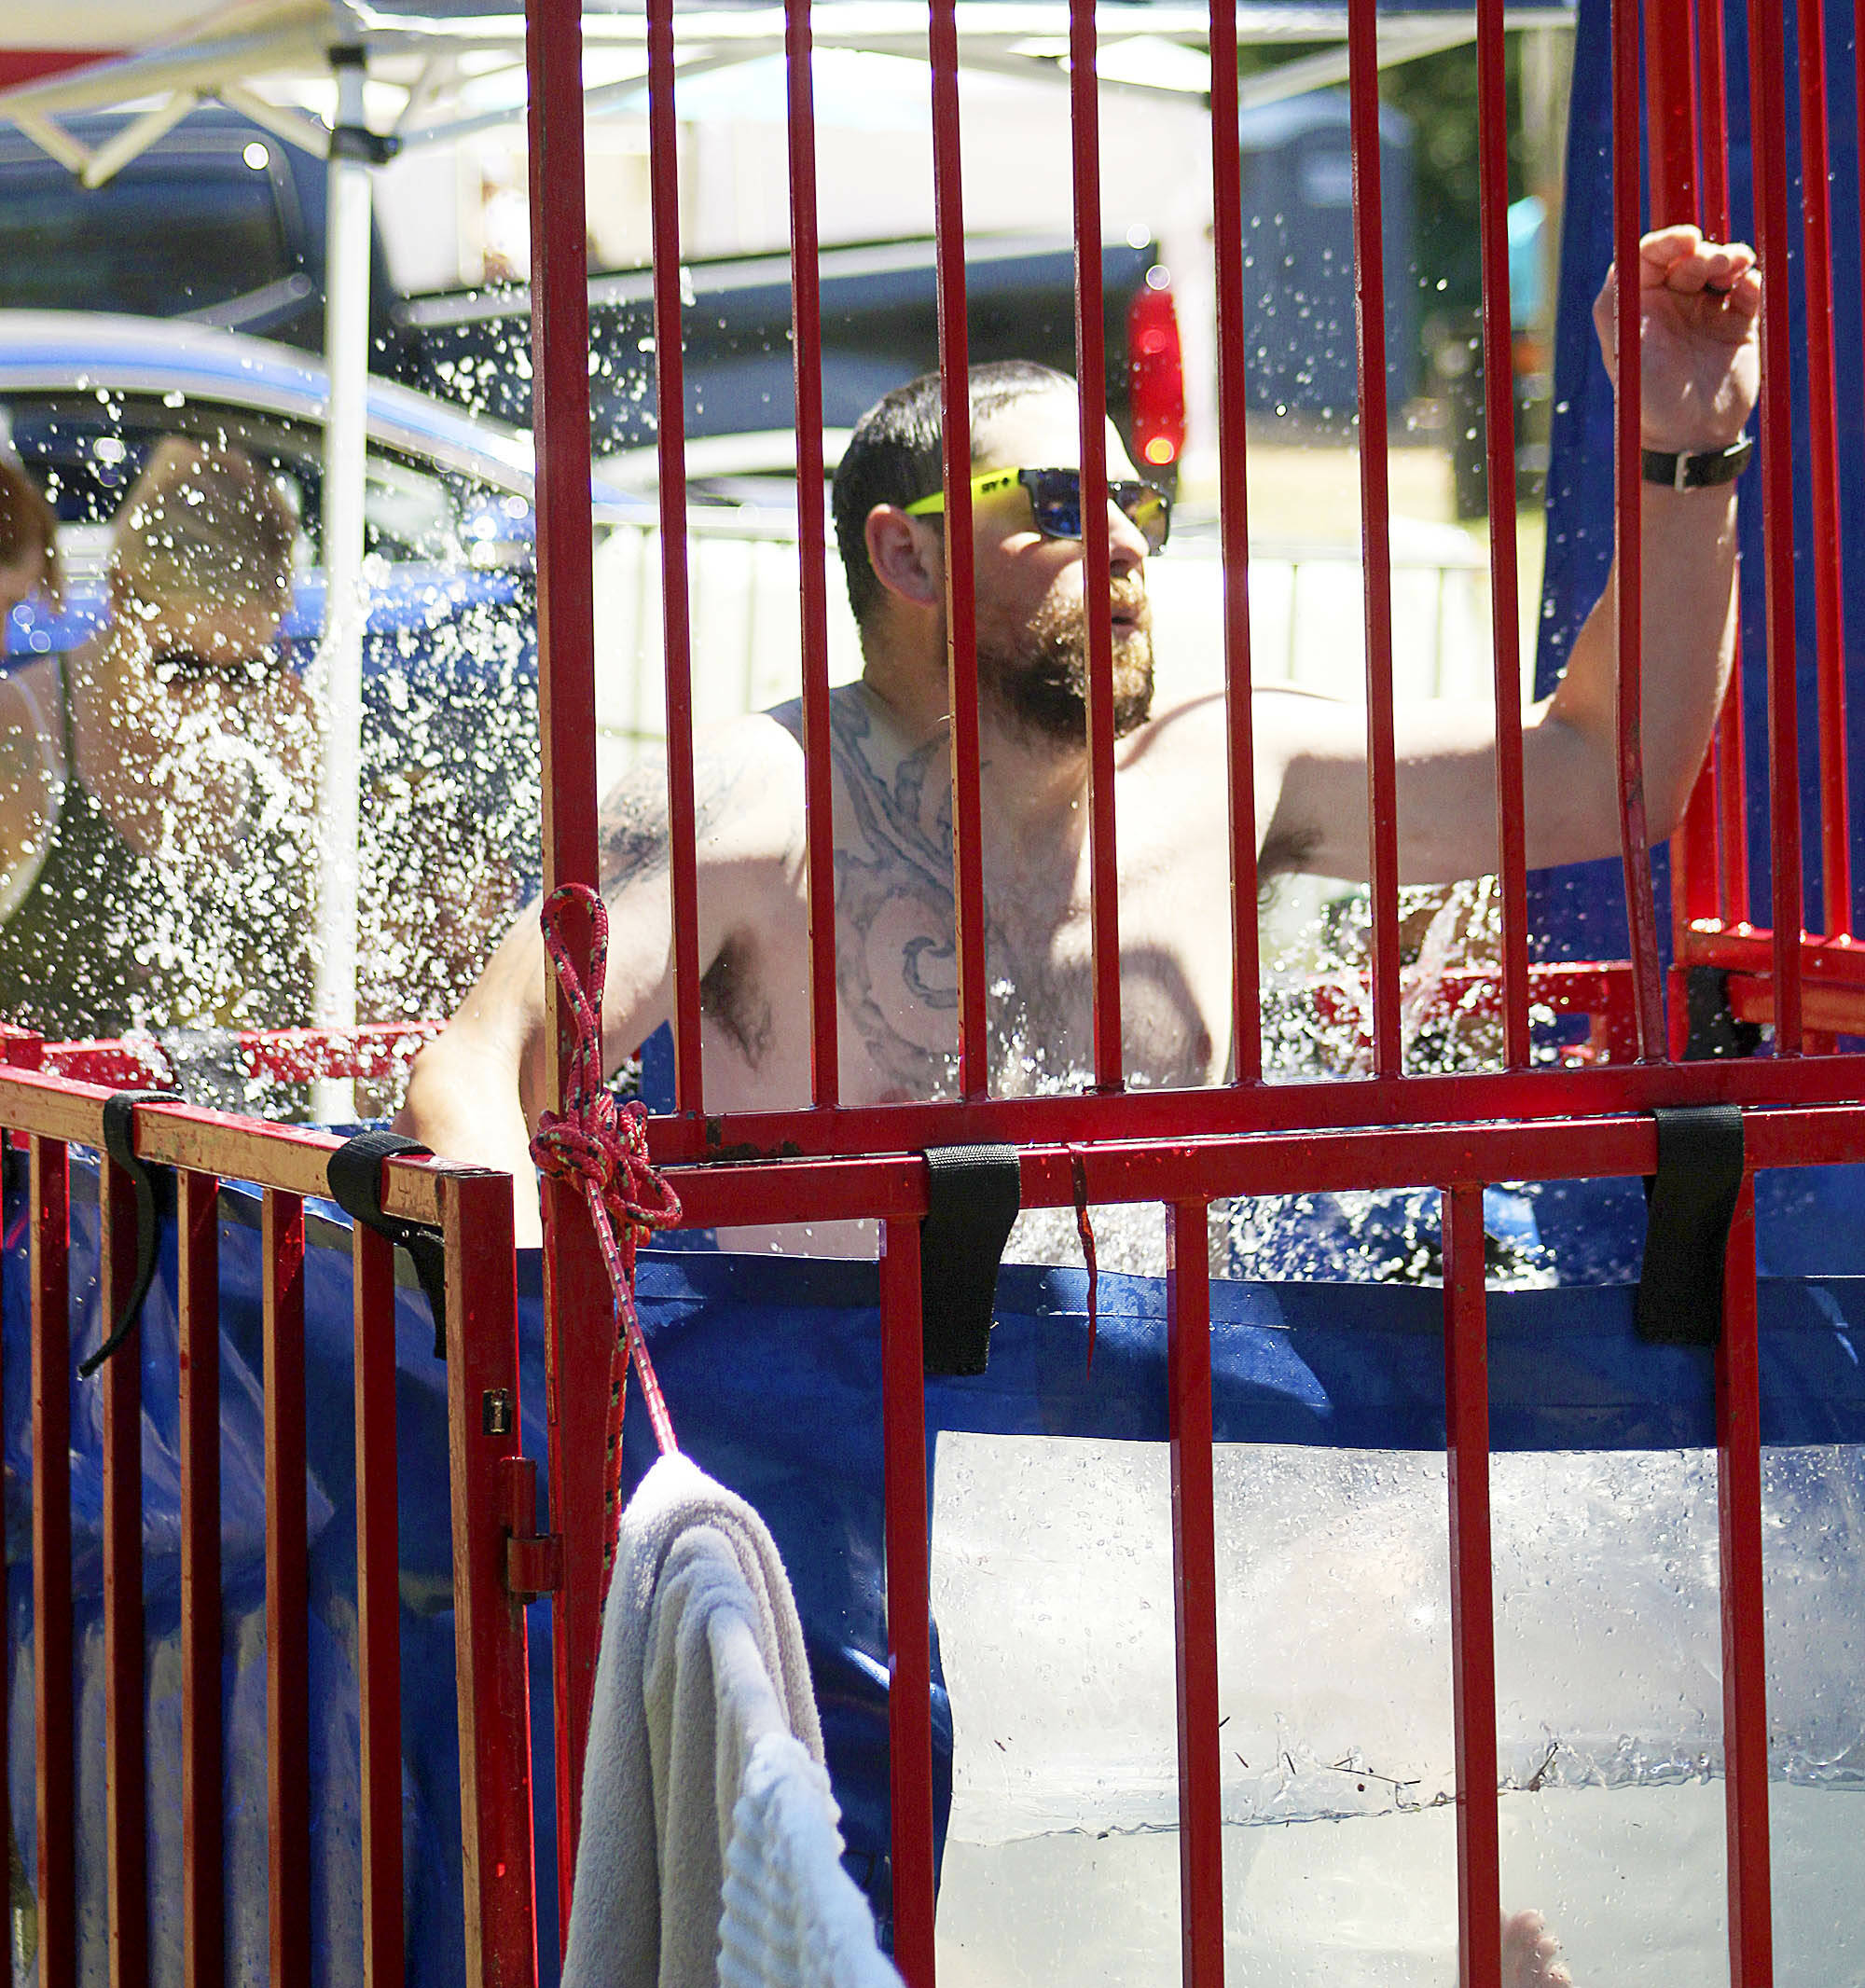 The dunk tank provided some relief from the sun Saturday at the handcar races. Photo by Ray Miller-Still